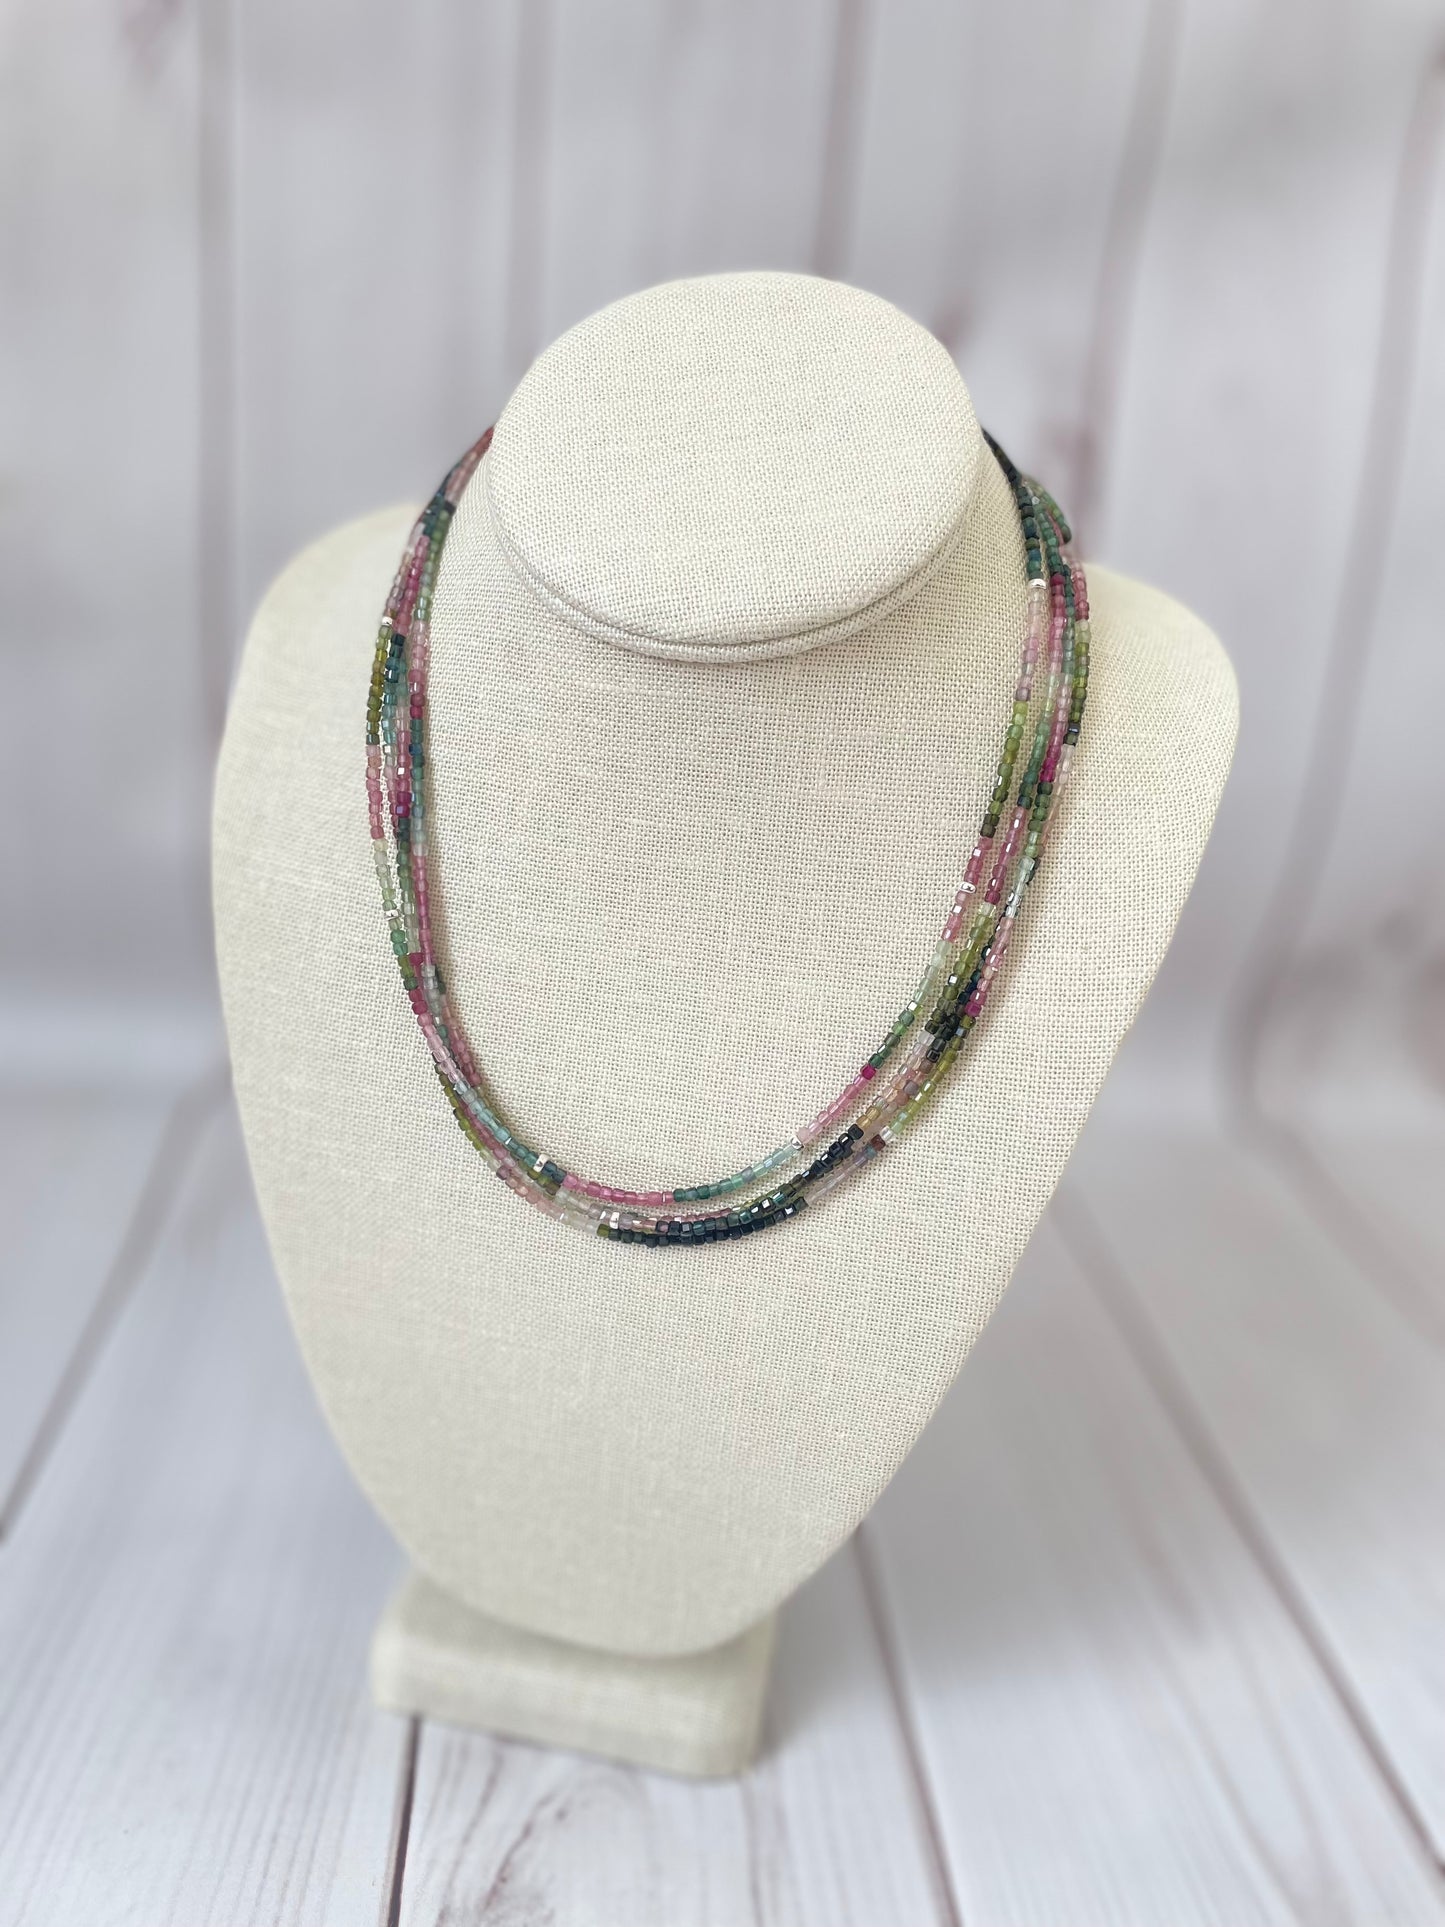 Delicate Tourmaline and Sterling Necklace